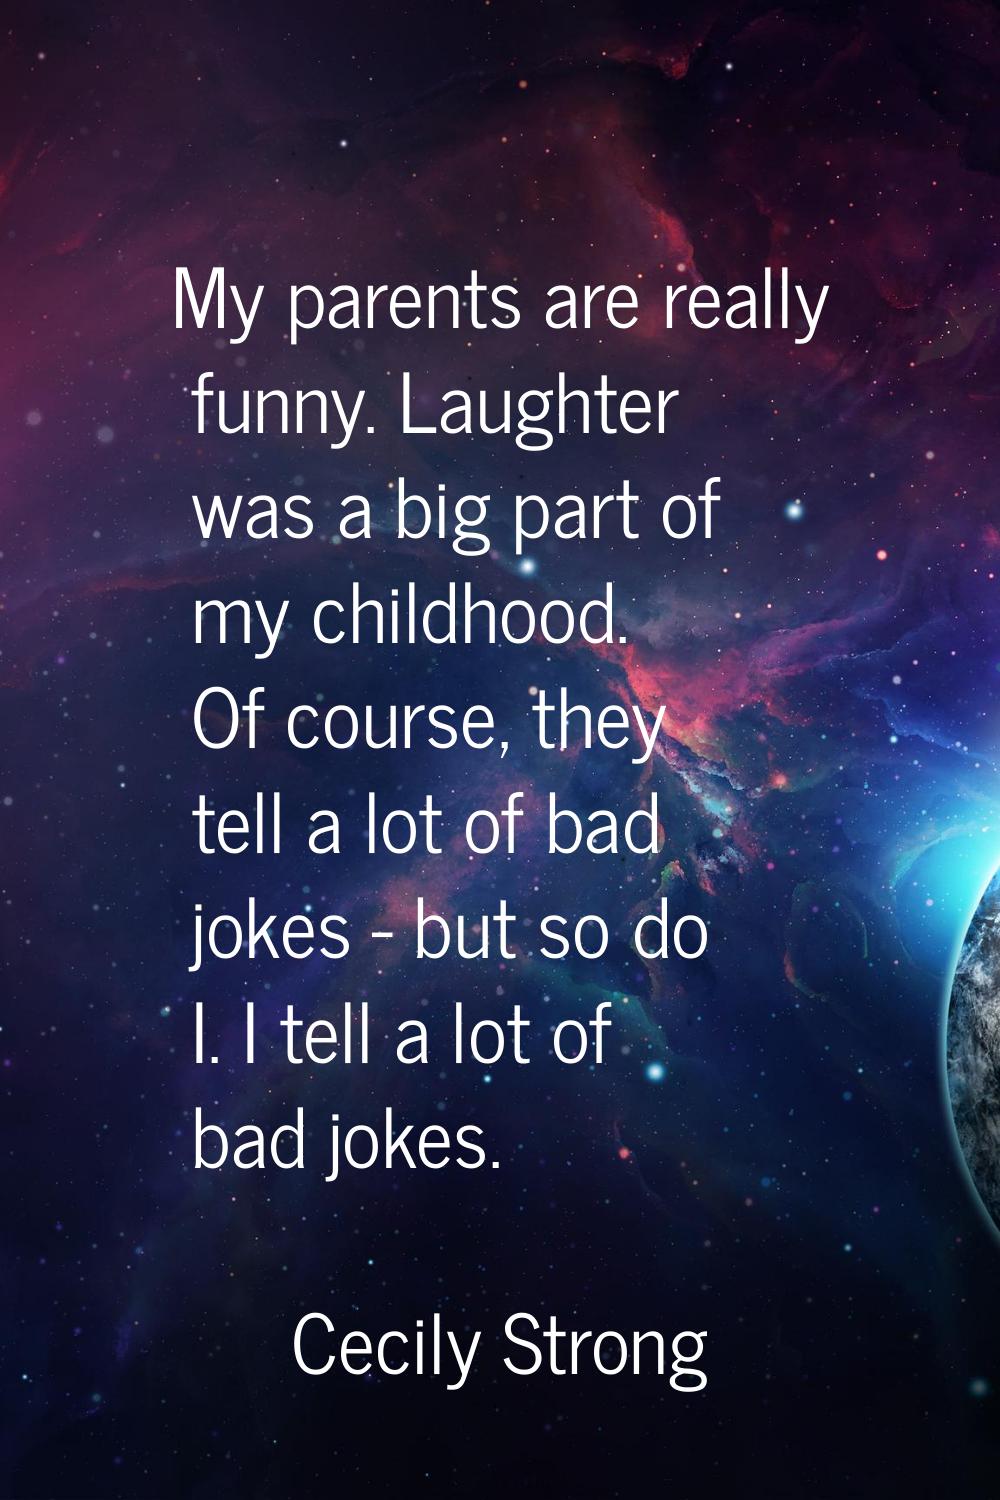 My parents are really funny. Laughter was a big part of my childhood. Of course, they tell a lot of